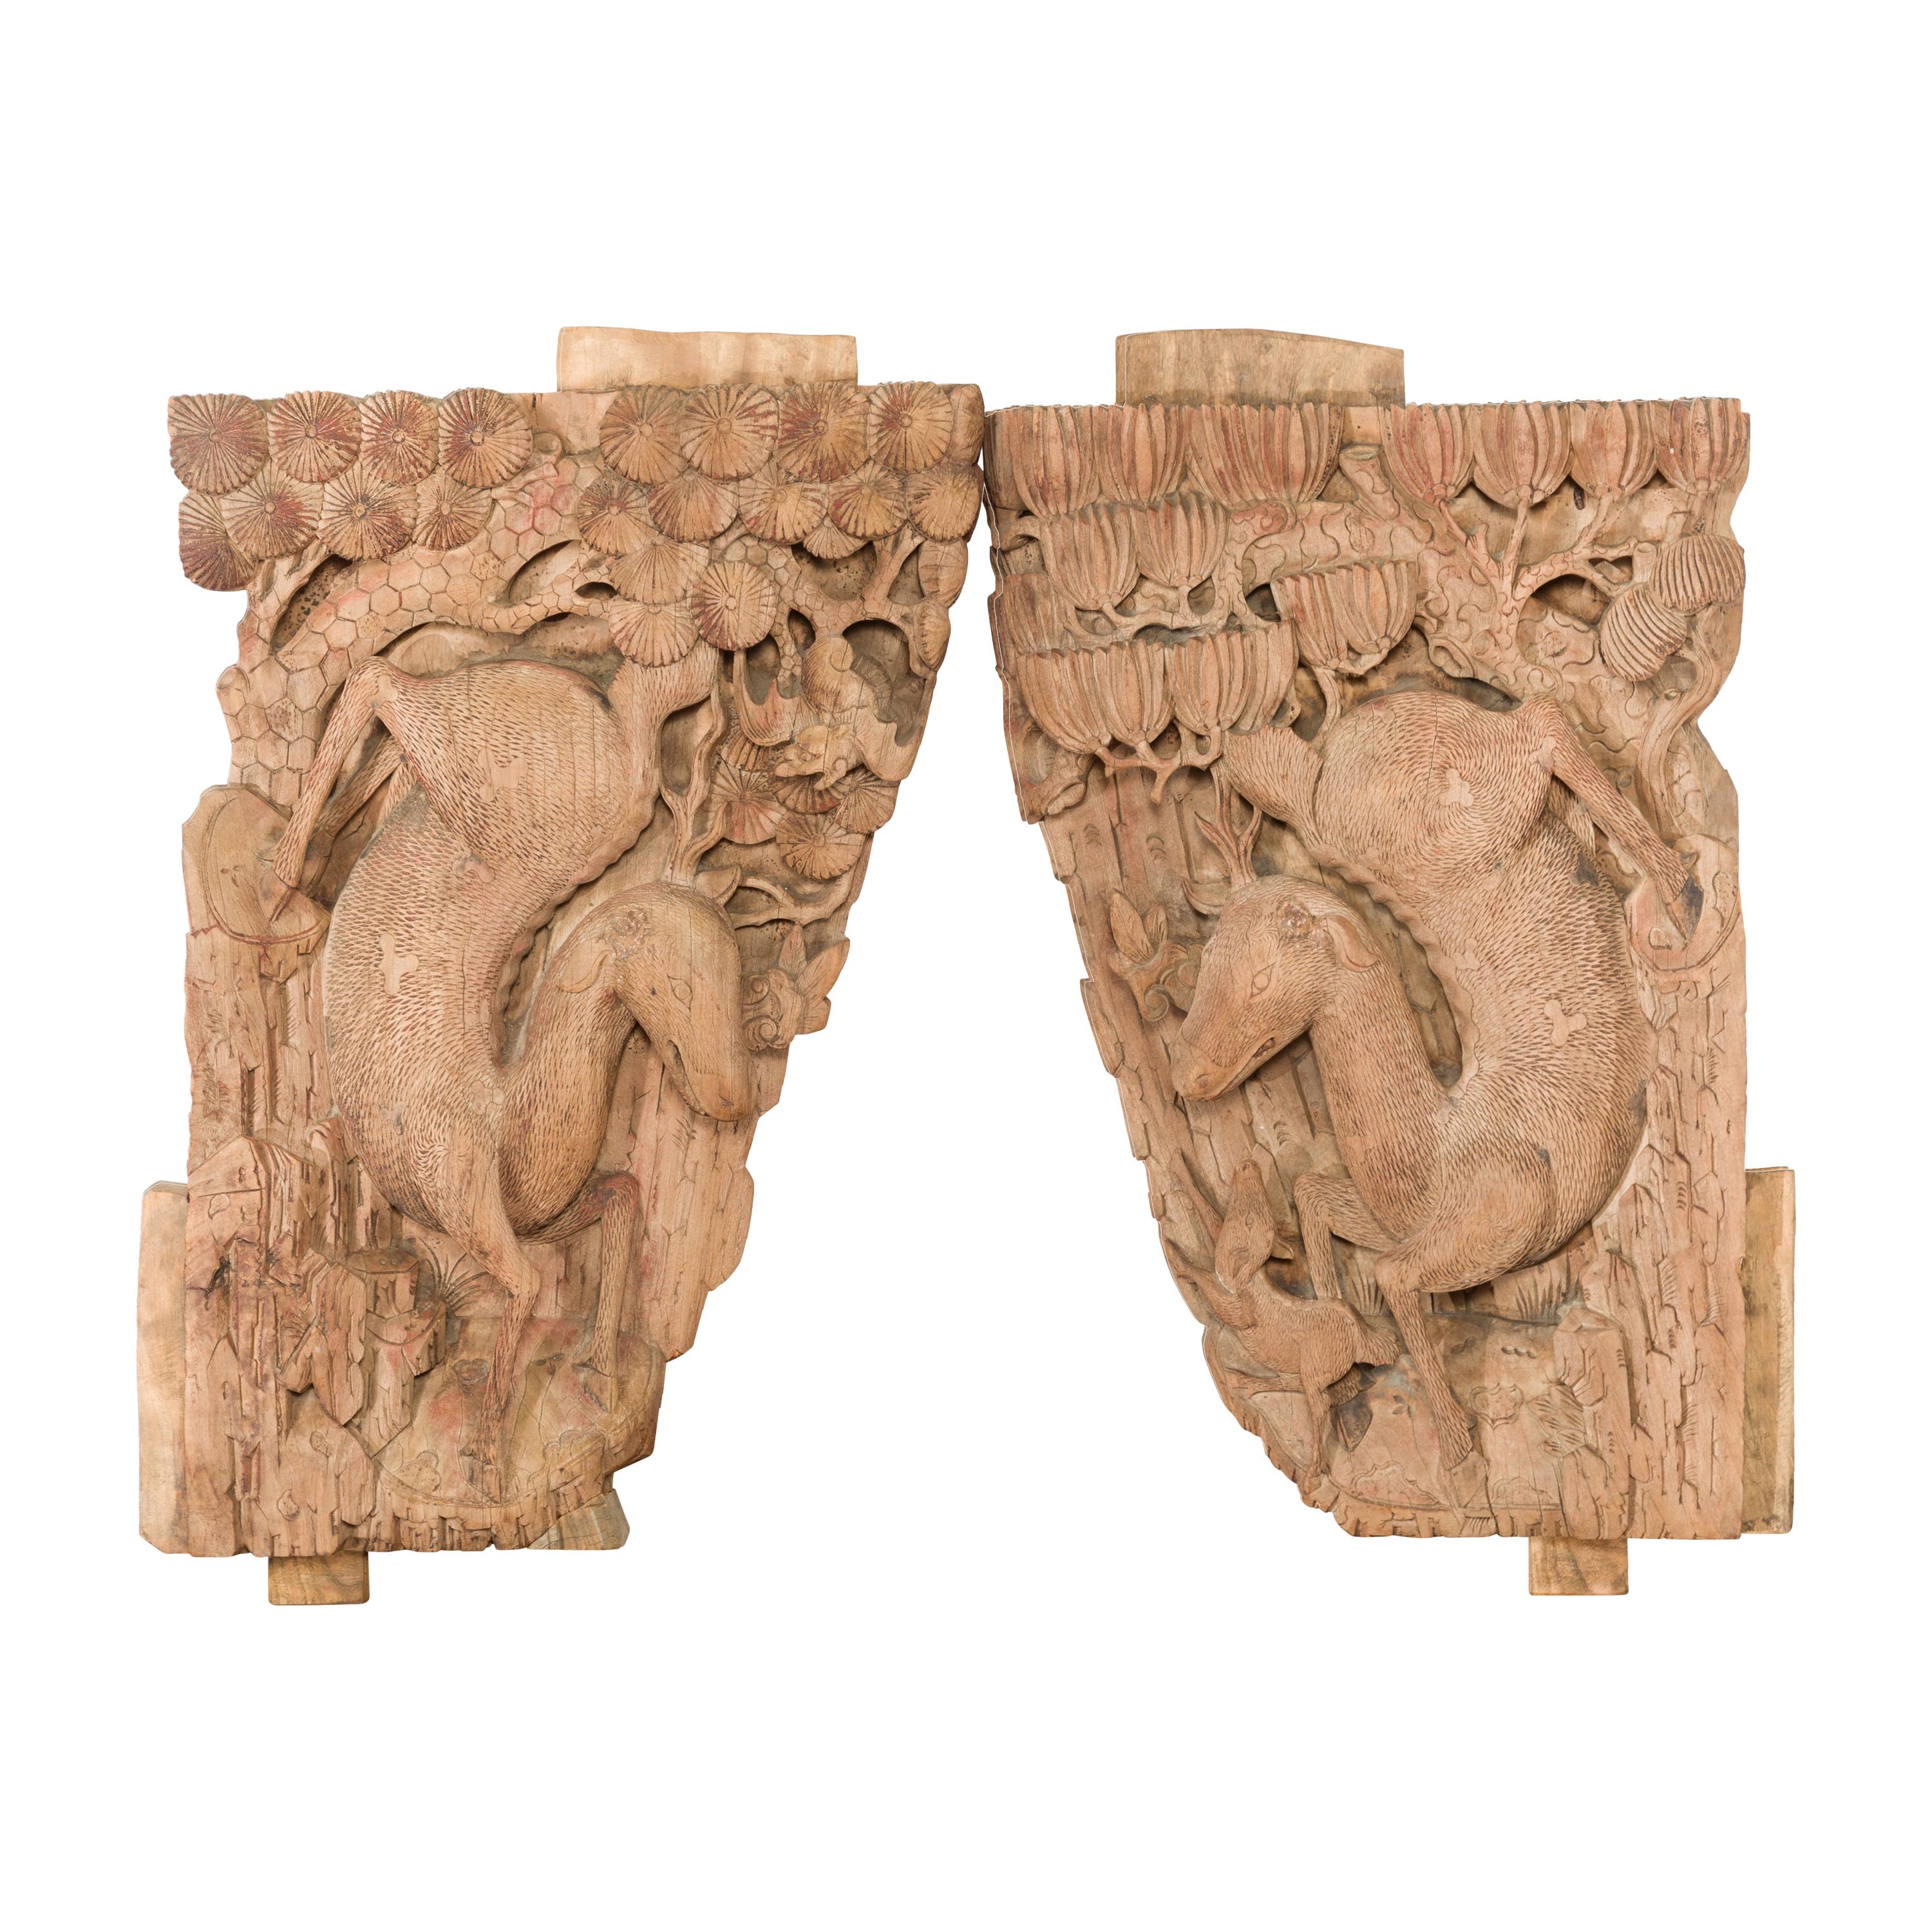 Pair of Qing Dynasty Hand-Carved Wooden Temple Corbels with Deer Motifs